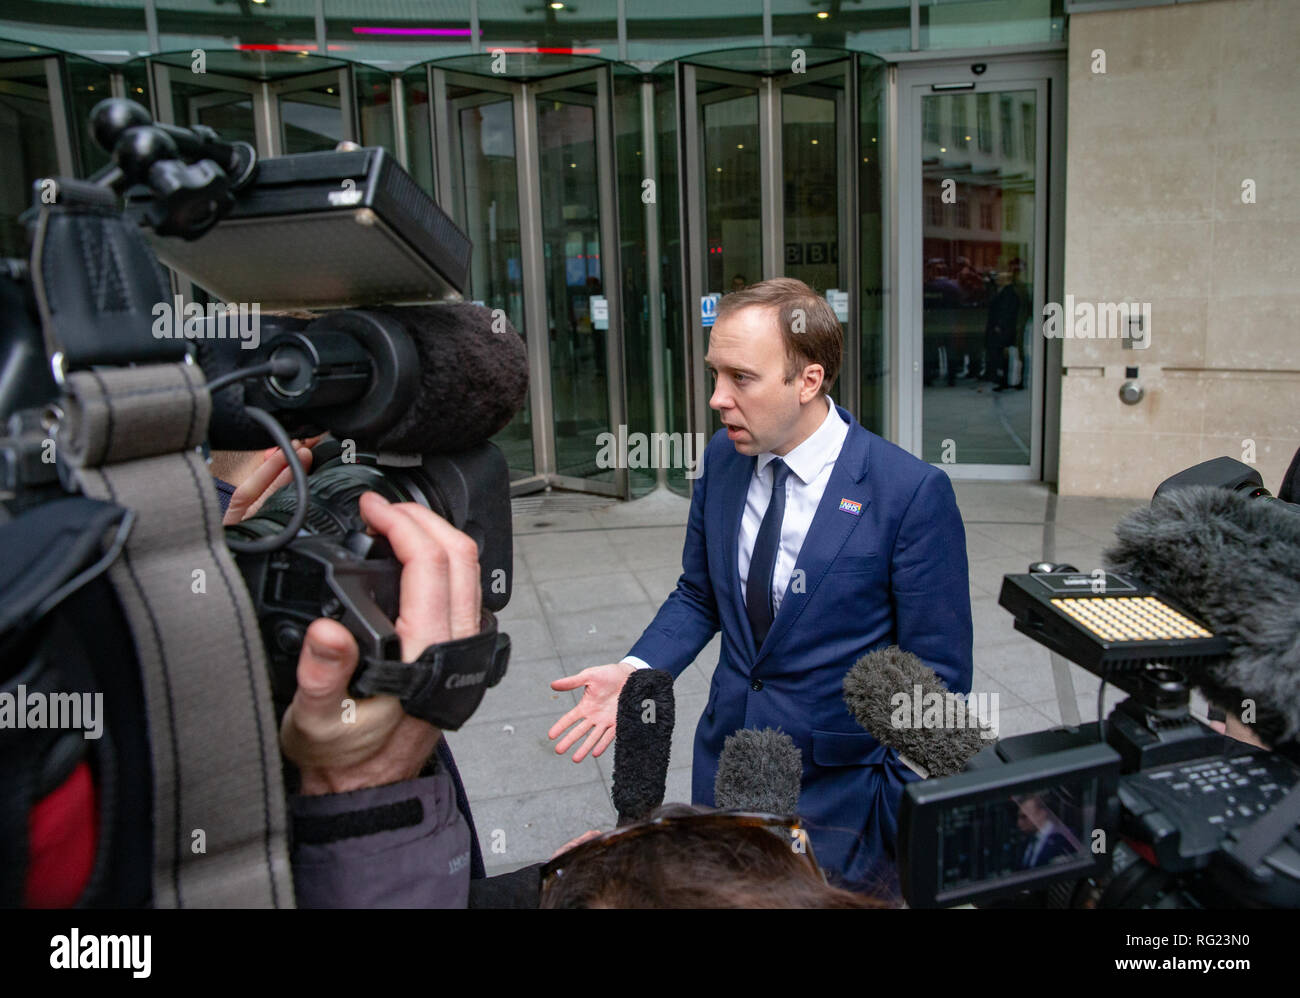 London, UK. 27th January, 2019. Matthew Hancock, Secretary of State for Health and Social care, speaks to the waiting media after appearing on the Andrew Marr Television Show at the BBC Studios. He said that the Government have not ruled out banning social media fims if they fail to remove content that promotes self-harm and suicide. Credit: Tommy London/Alamy Live News Stock Photo